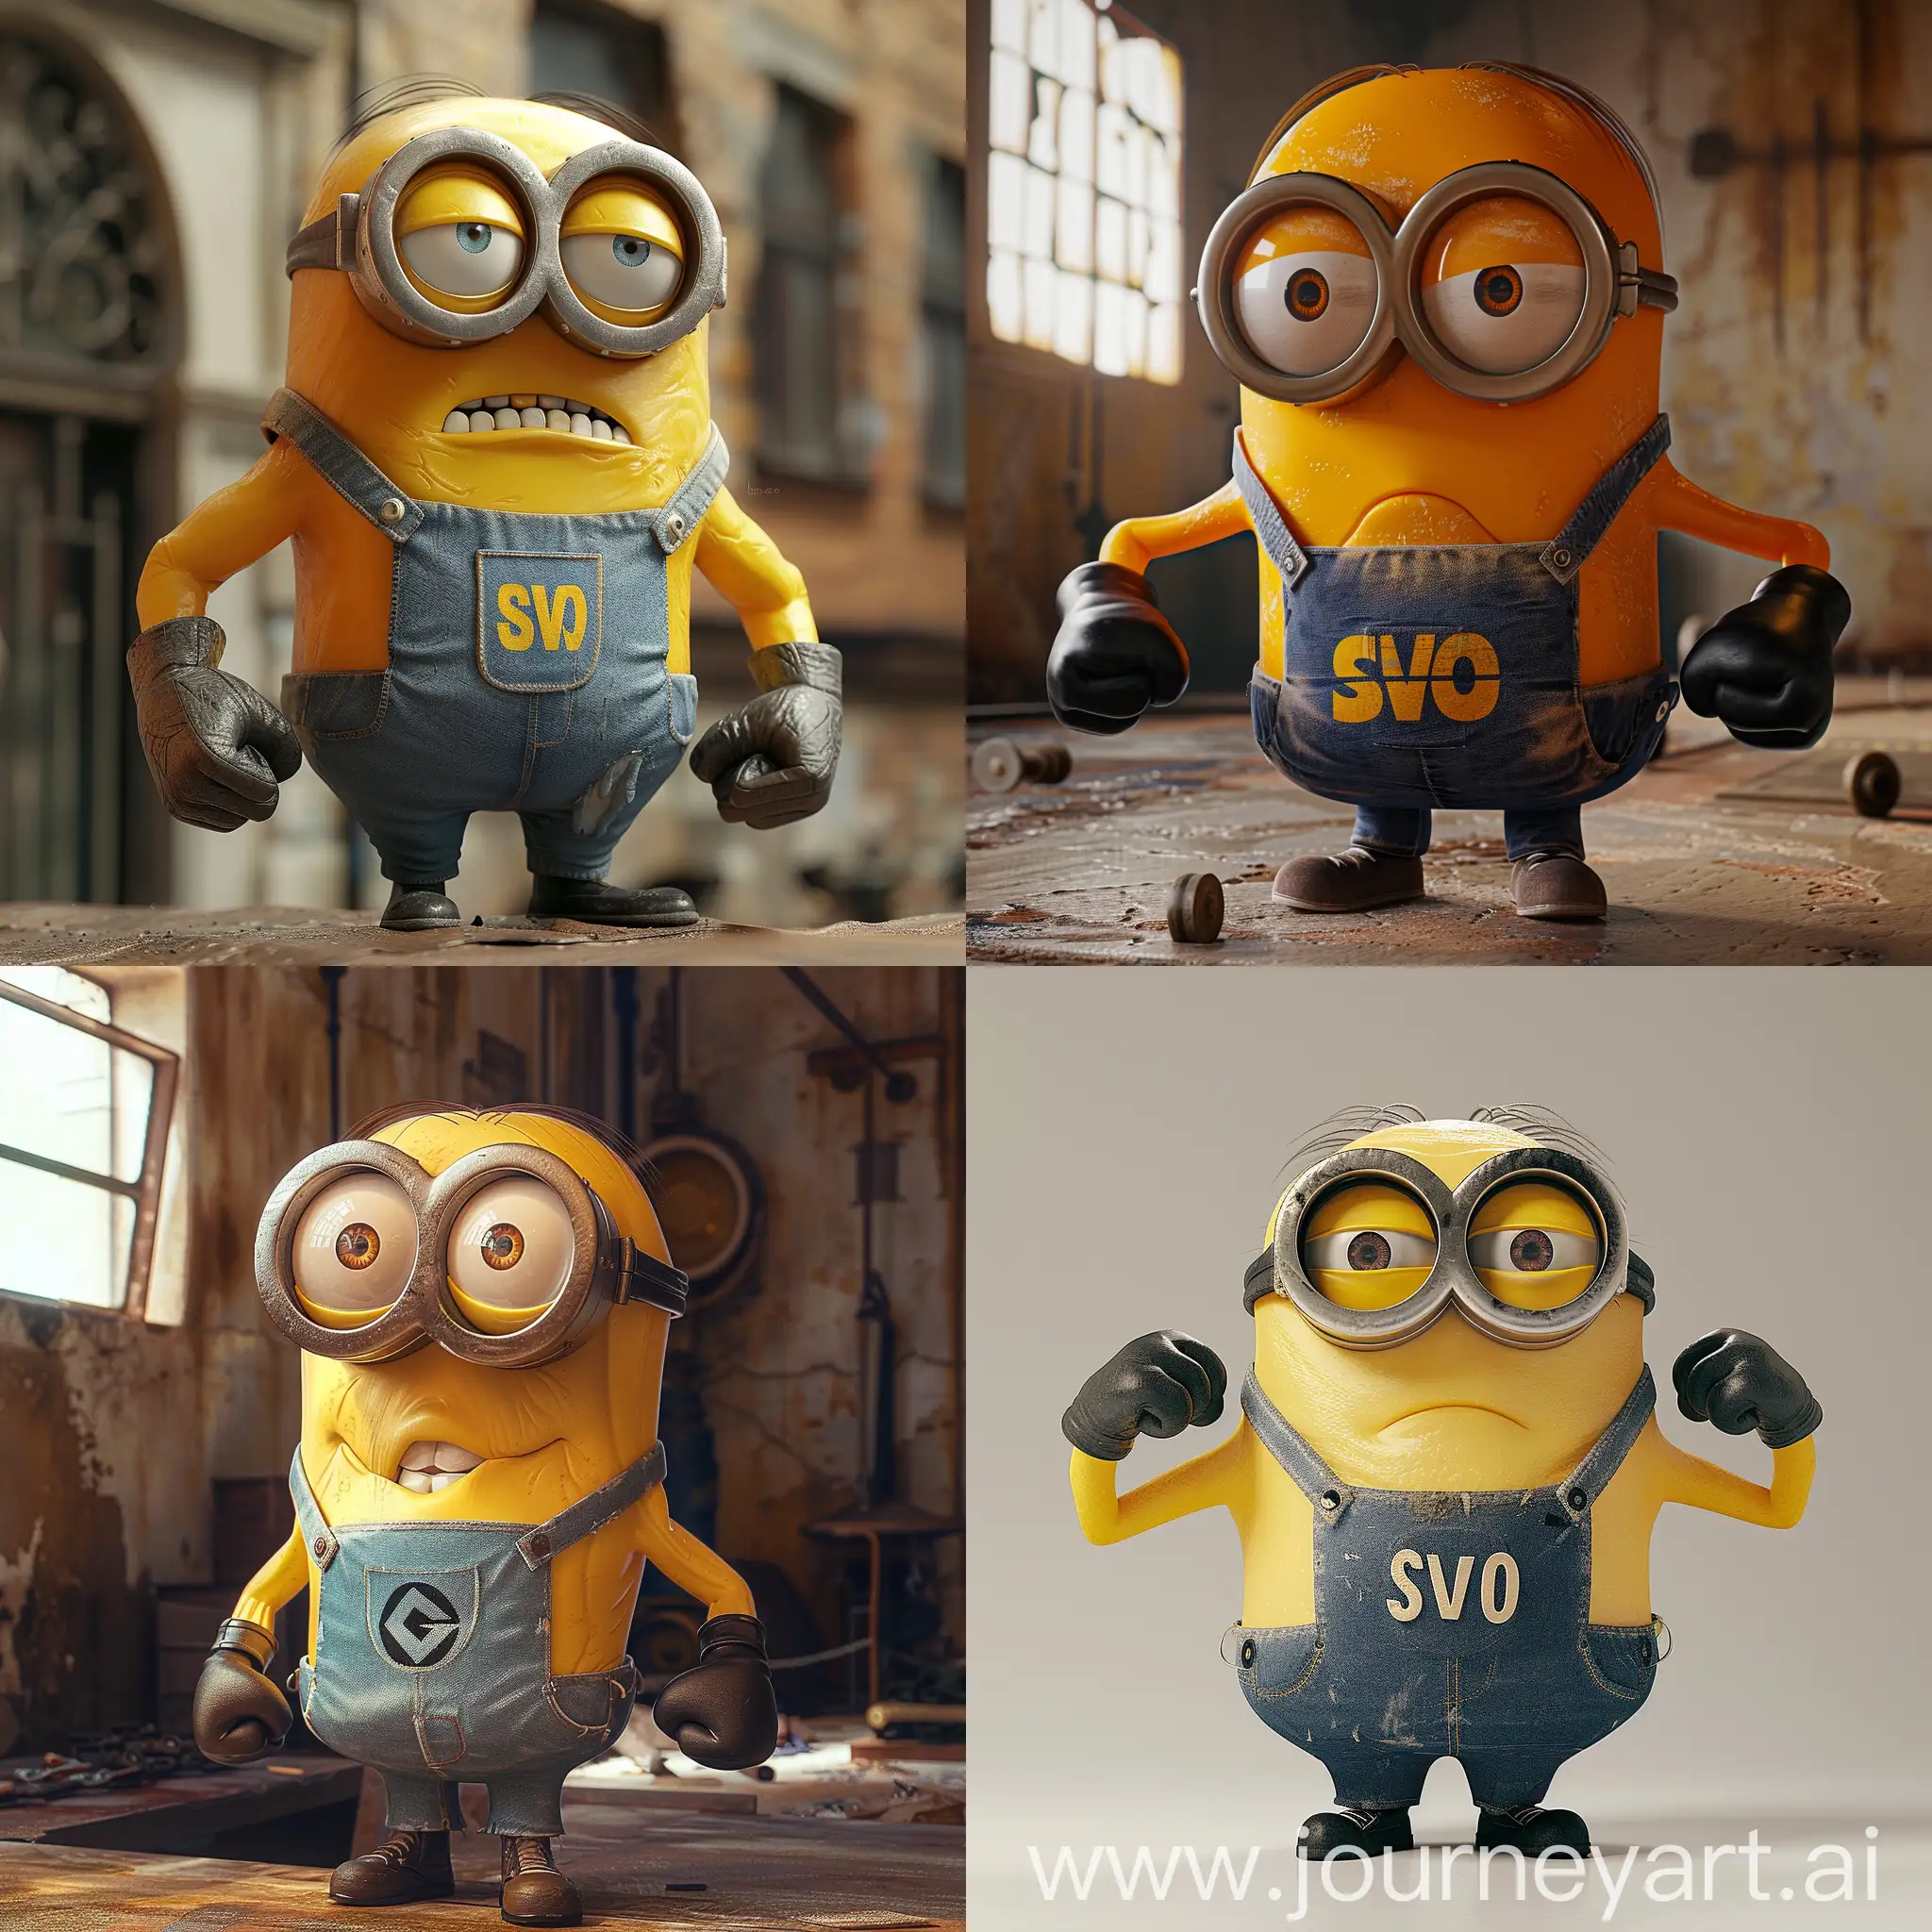 Strong-Minion-from-Despicable-Me-in-SVO-TShirt